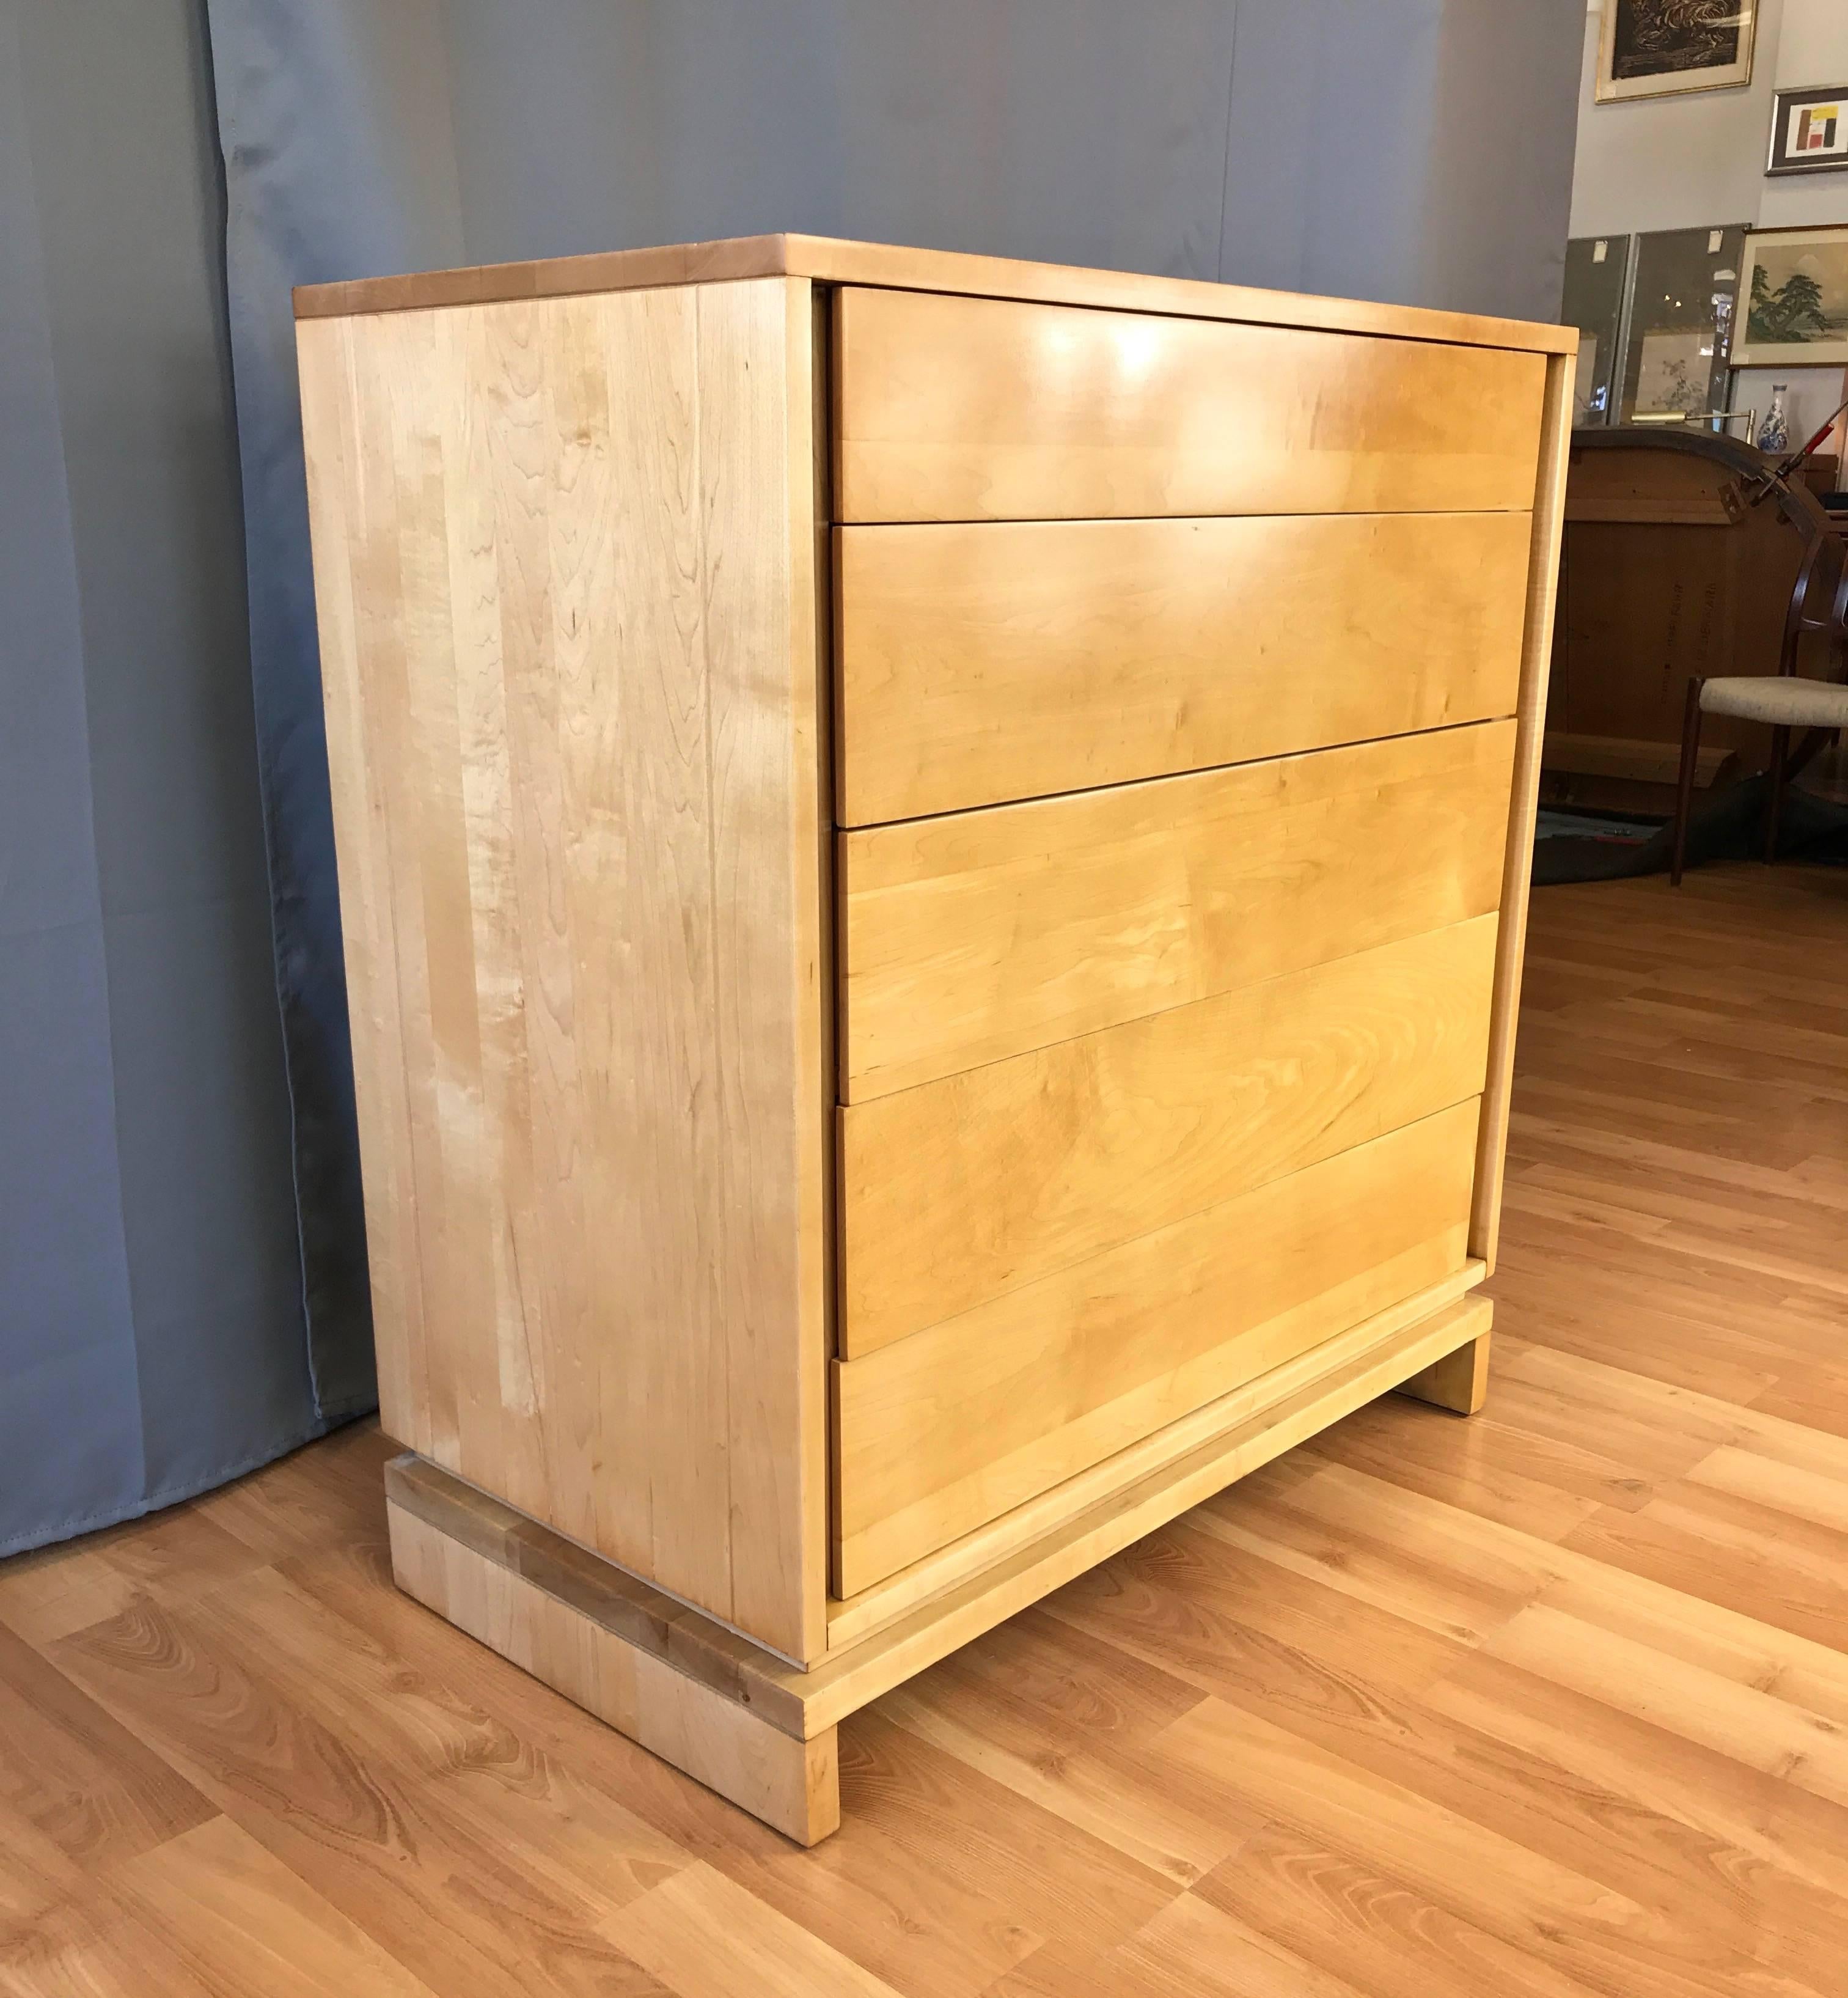 A 1950s birch Model 2004 chest of drawers or dresser designed by Van Keppel & Green for Brown Saltman.

Crafted out of birch with a beautiful tone and subtle figure. Five drawers, with pulls along either edge which presents a clean, minimalist